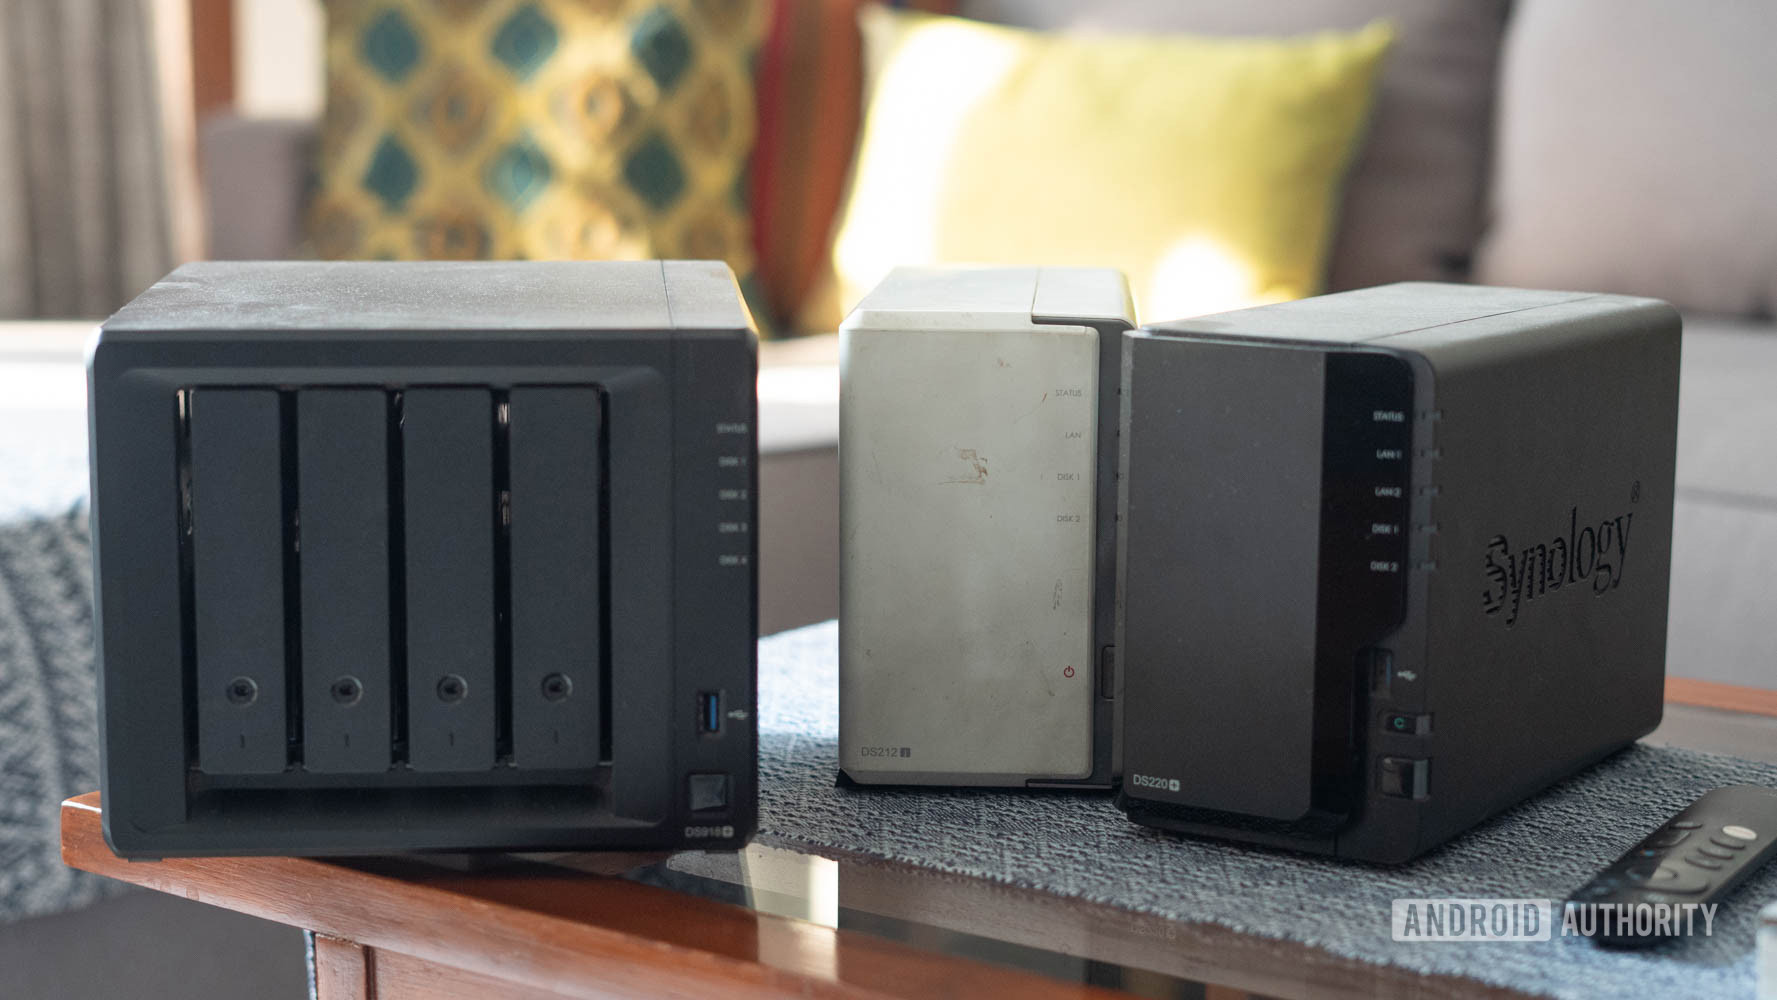 Three Synology NAS boxes placed next to each other